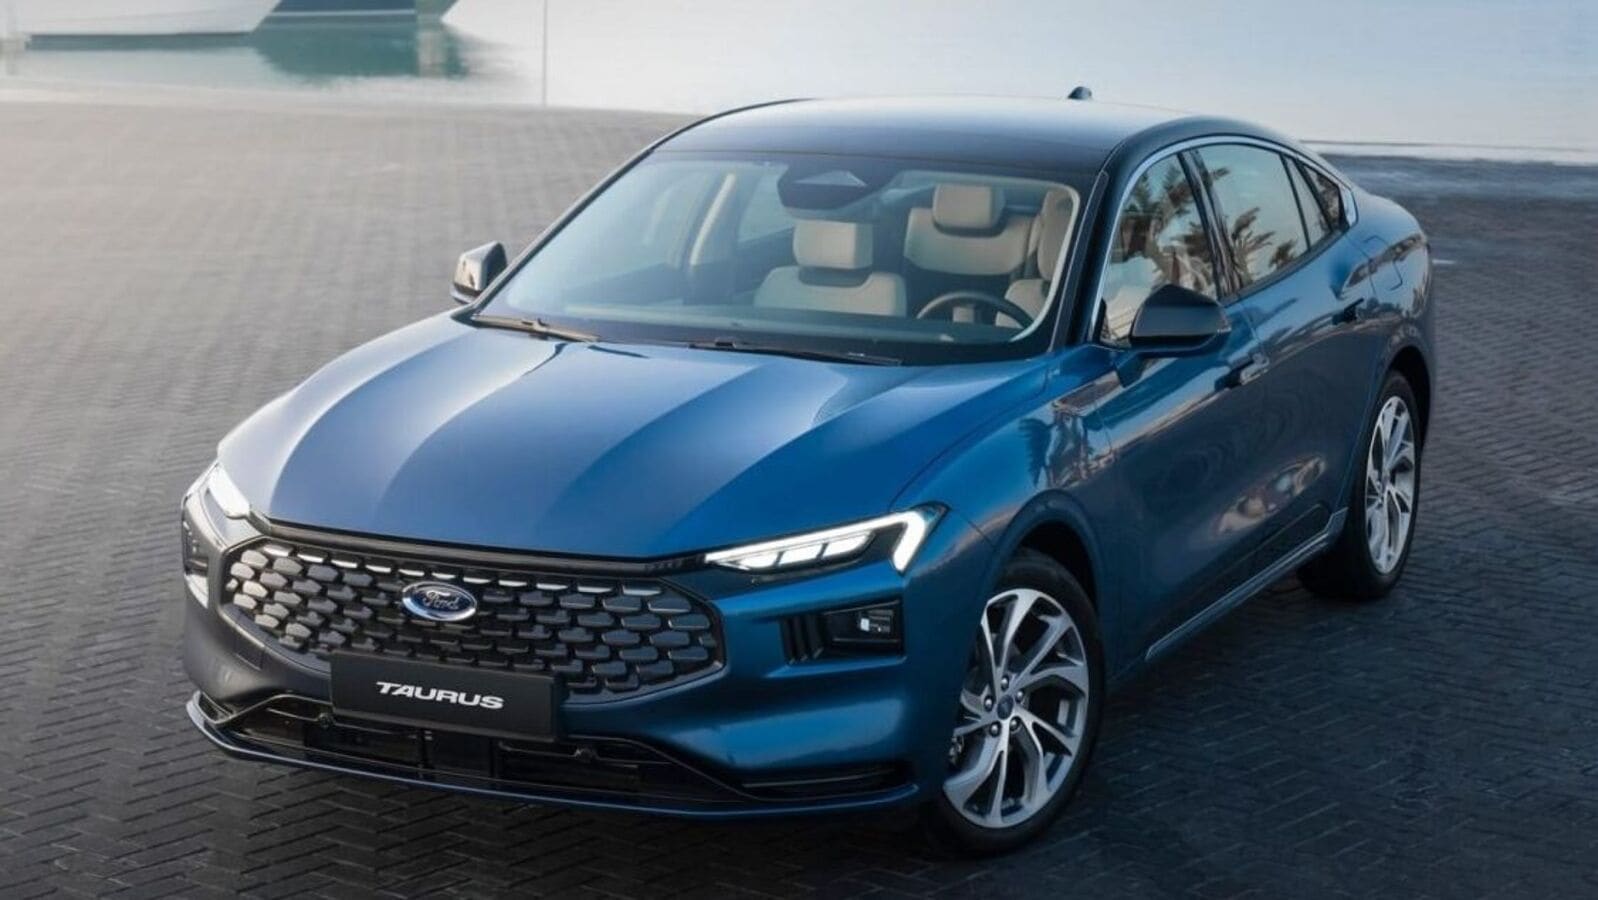 2022 Ford Taurus Debuts In Middle East Img1 1280x720 1651037761746 1651037774130 